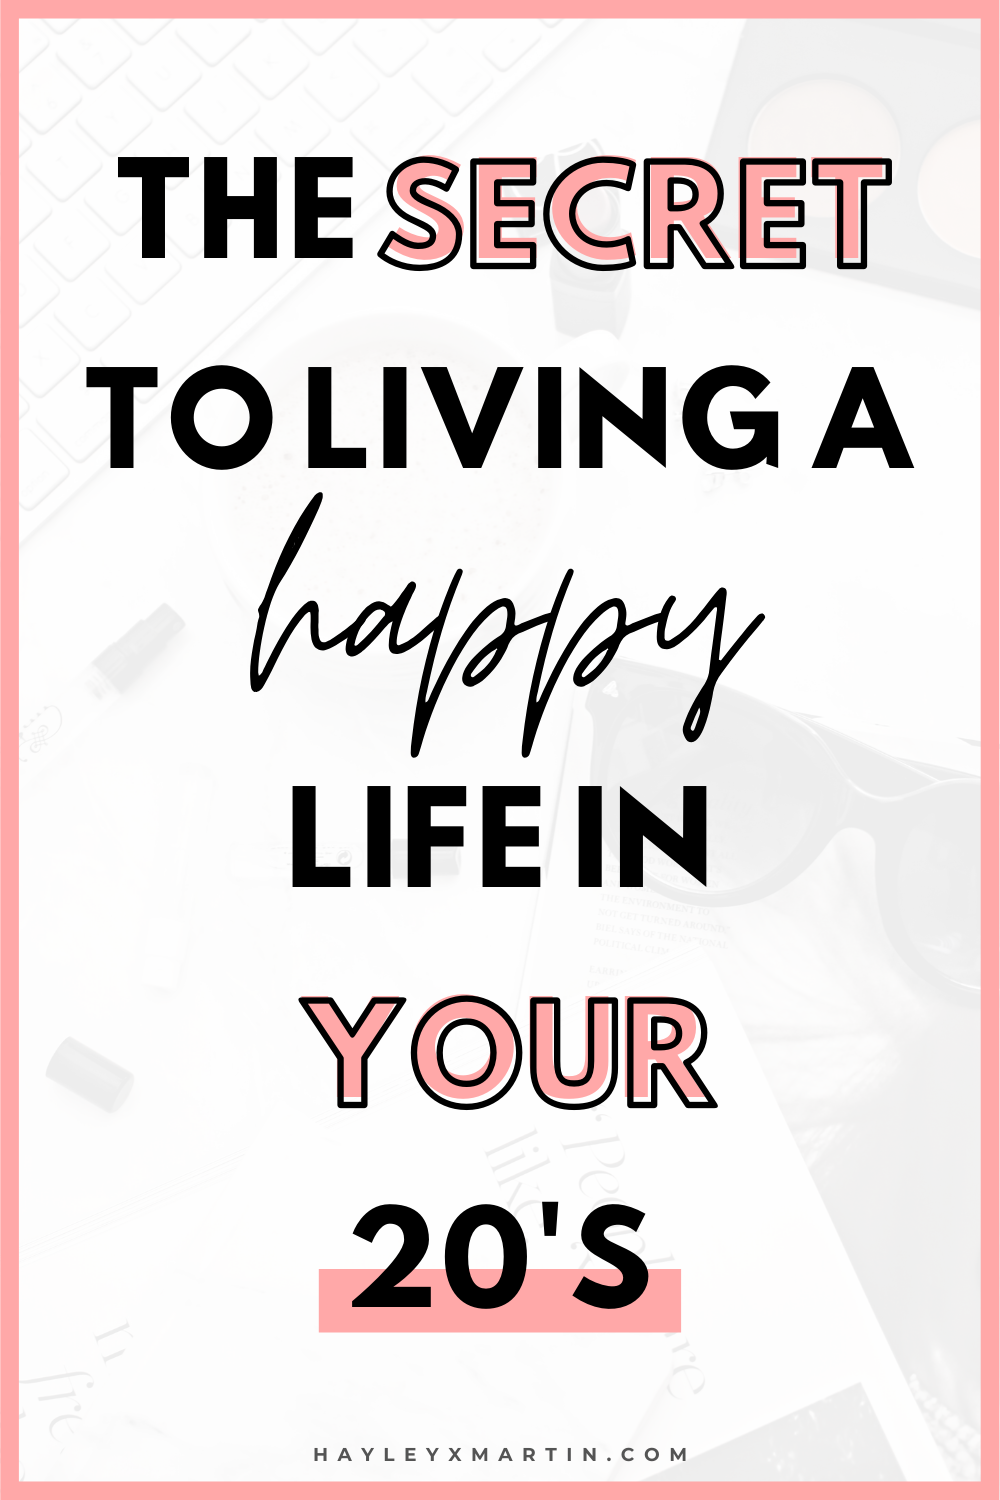 THE SECRET TO LIVING A HAPPY LIFE IN YOUR 20'S | HAYLEYXMARTIN